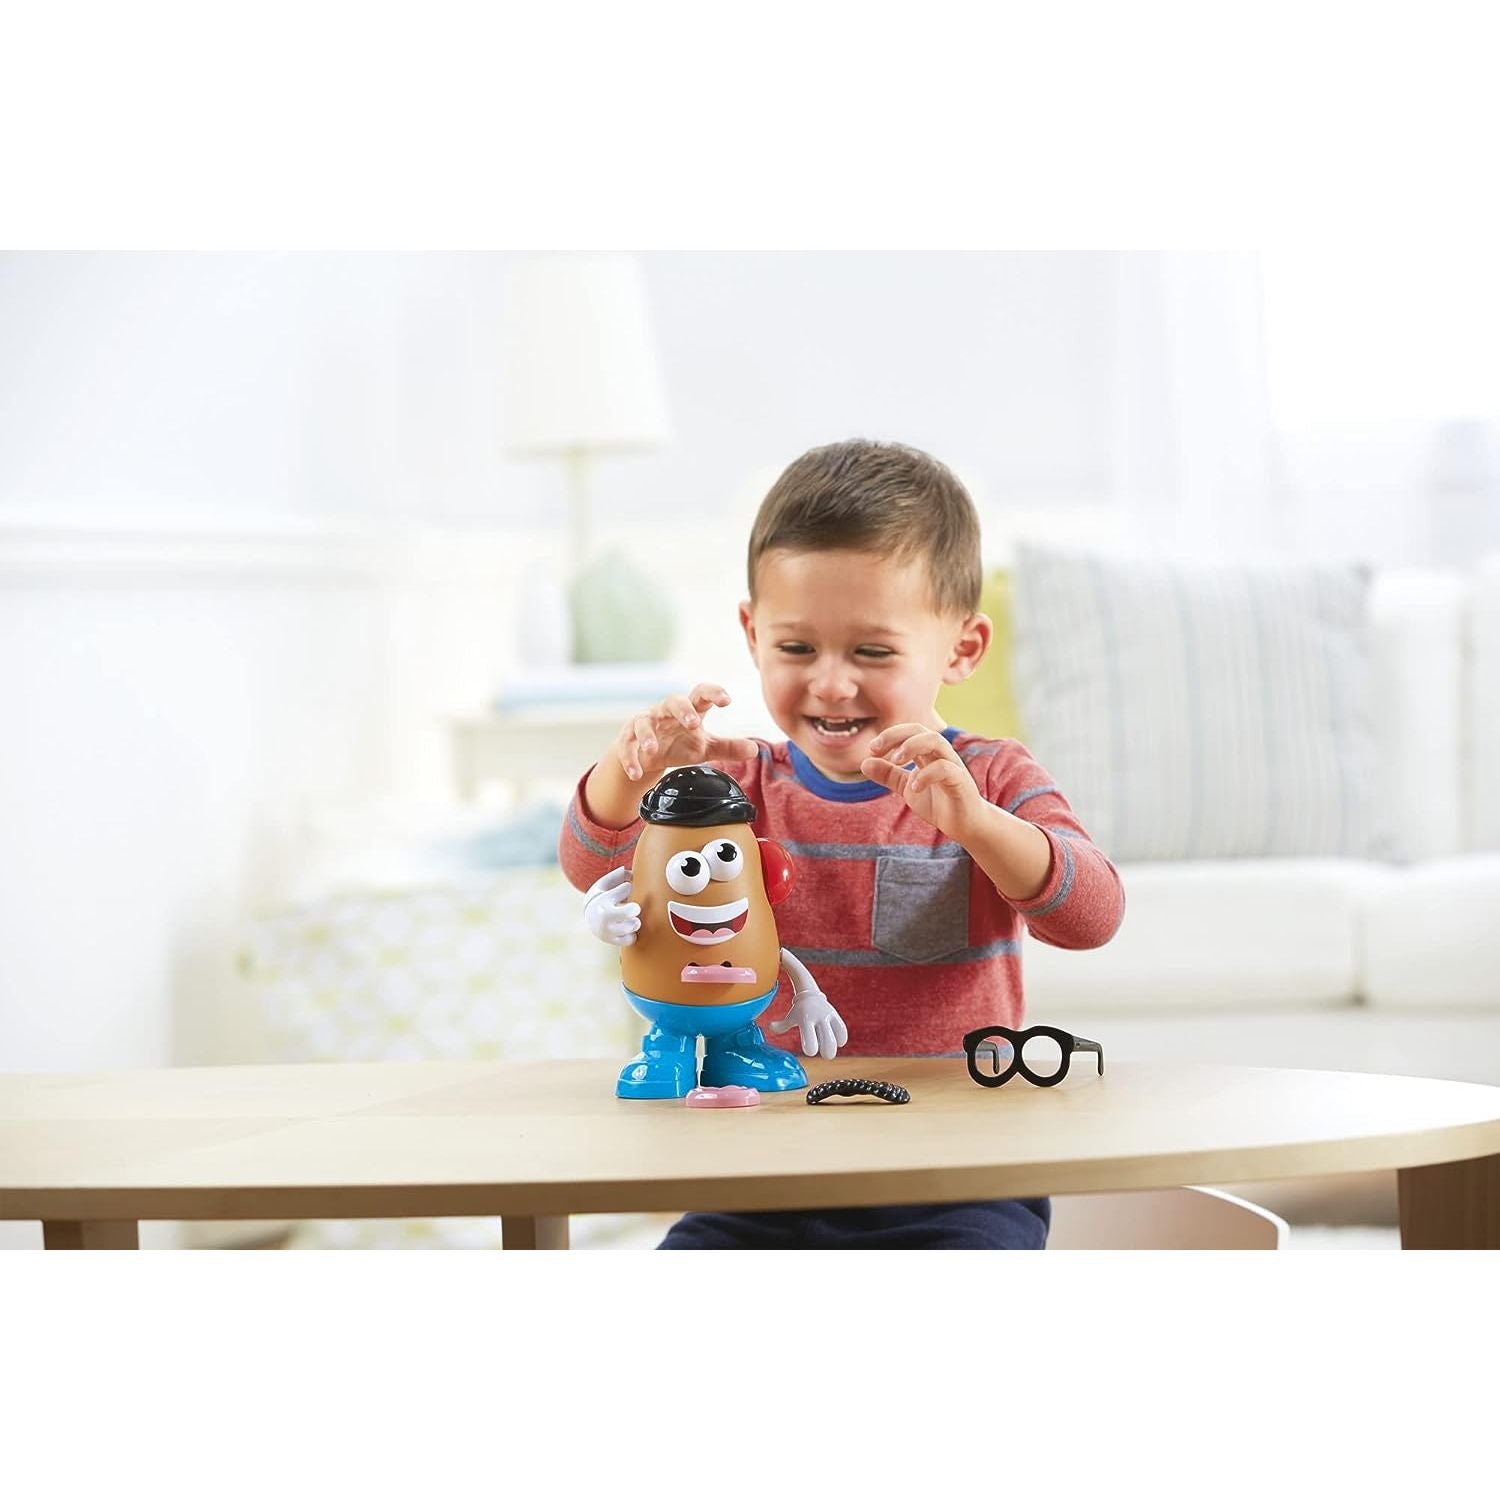 Mr Potato Head Classic Toy For Kids Ages 2 and Up,Includes 13 Parts and Pieces to Create Funny Faces